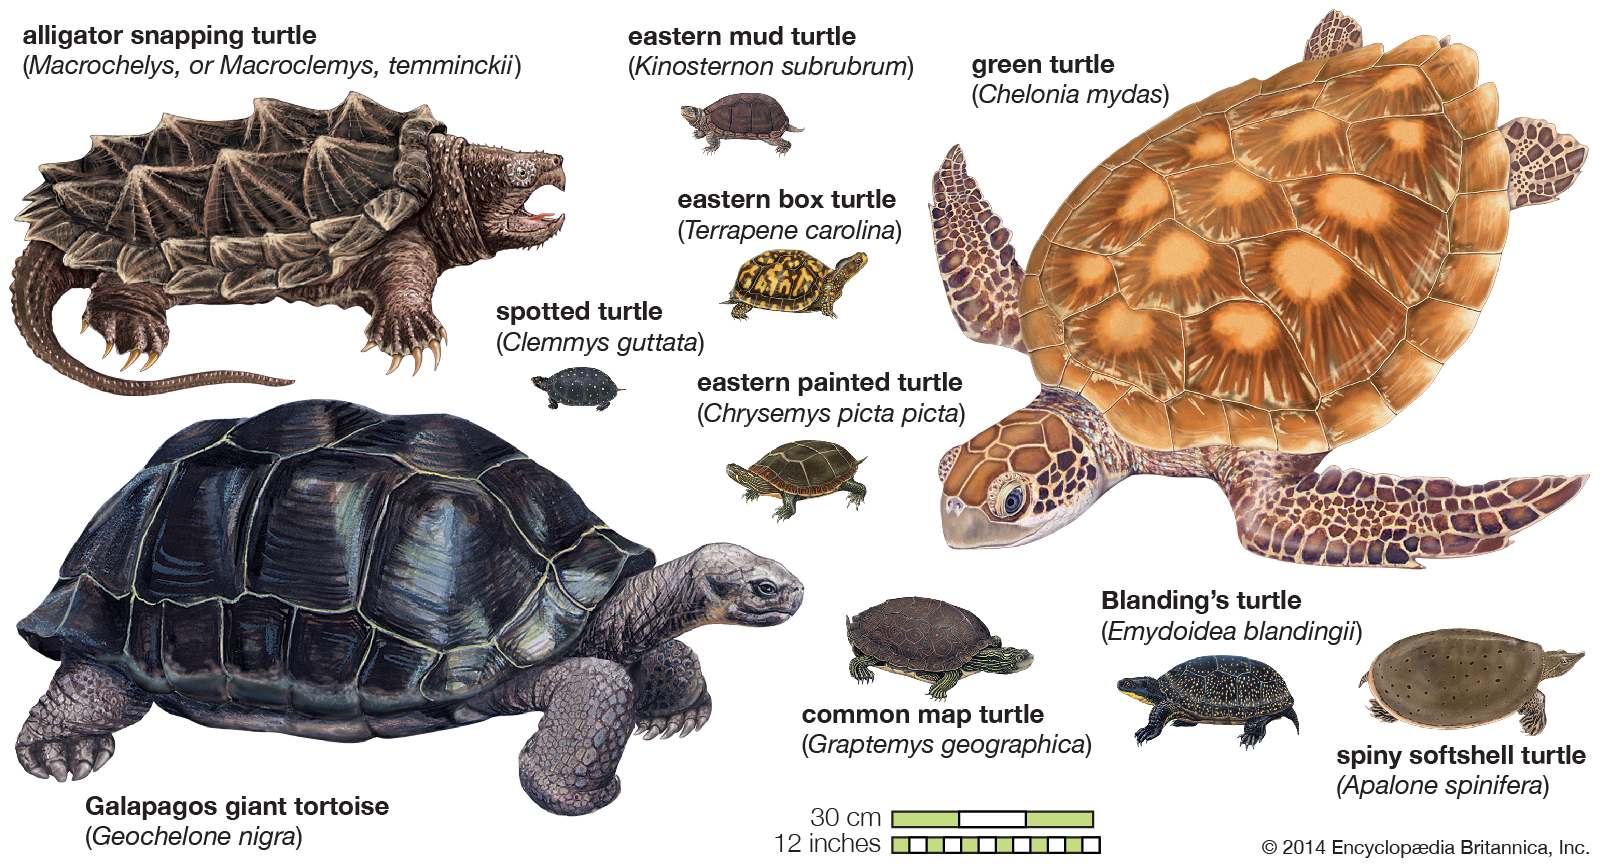 What are the different types of turtles?